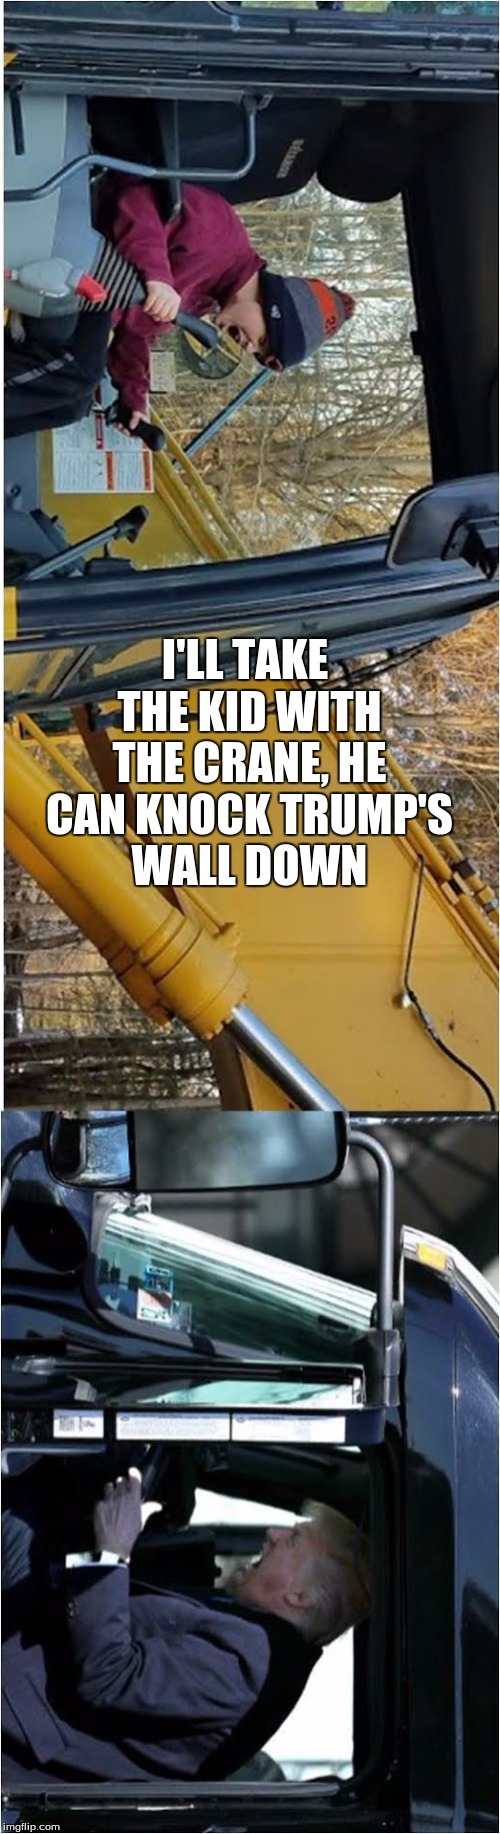 Trump Truck | I'LL TAKE THE KID WITH THE CRANE, HE CAN KNOCK TRUMP'S WALL DOWN | image tagged in memes,trumps wall | made w/ Imgflip meme maker